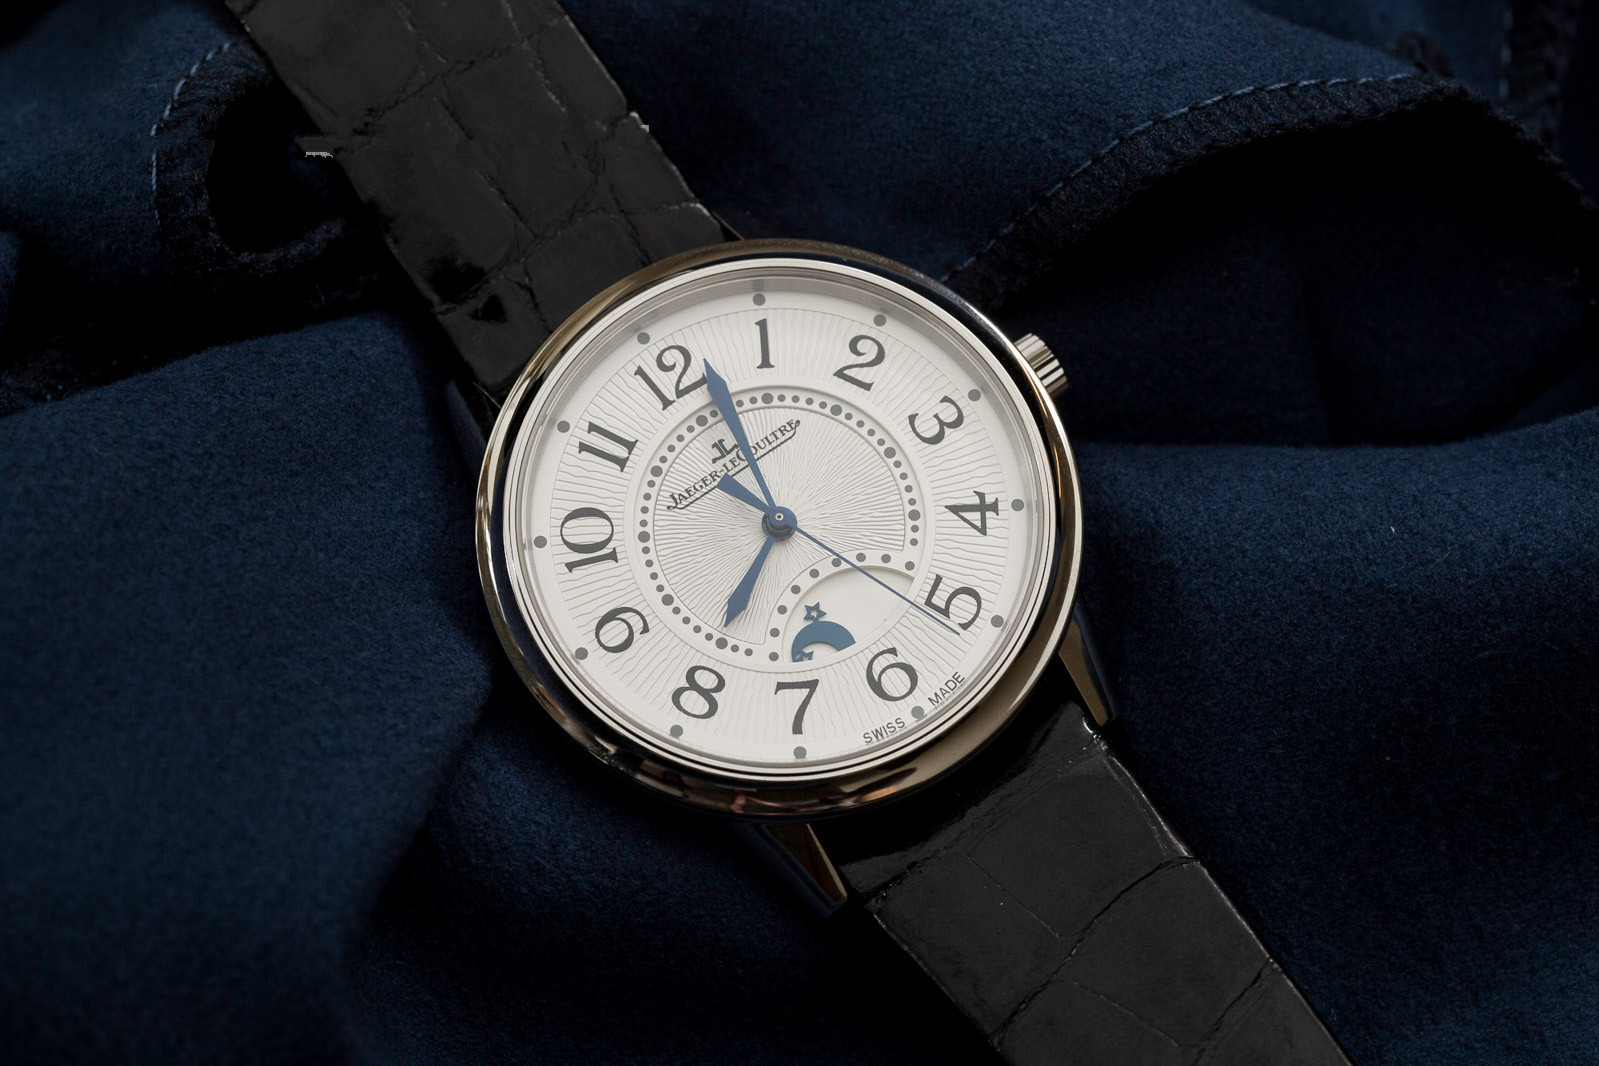 Jager-LeCoultre Rendez-Vous fake watches with white dials are designed for ladies.